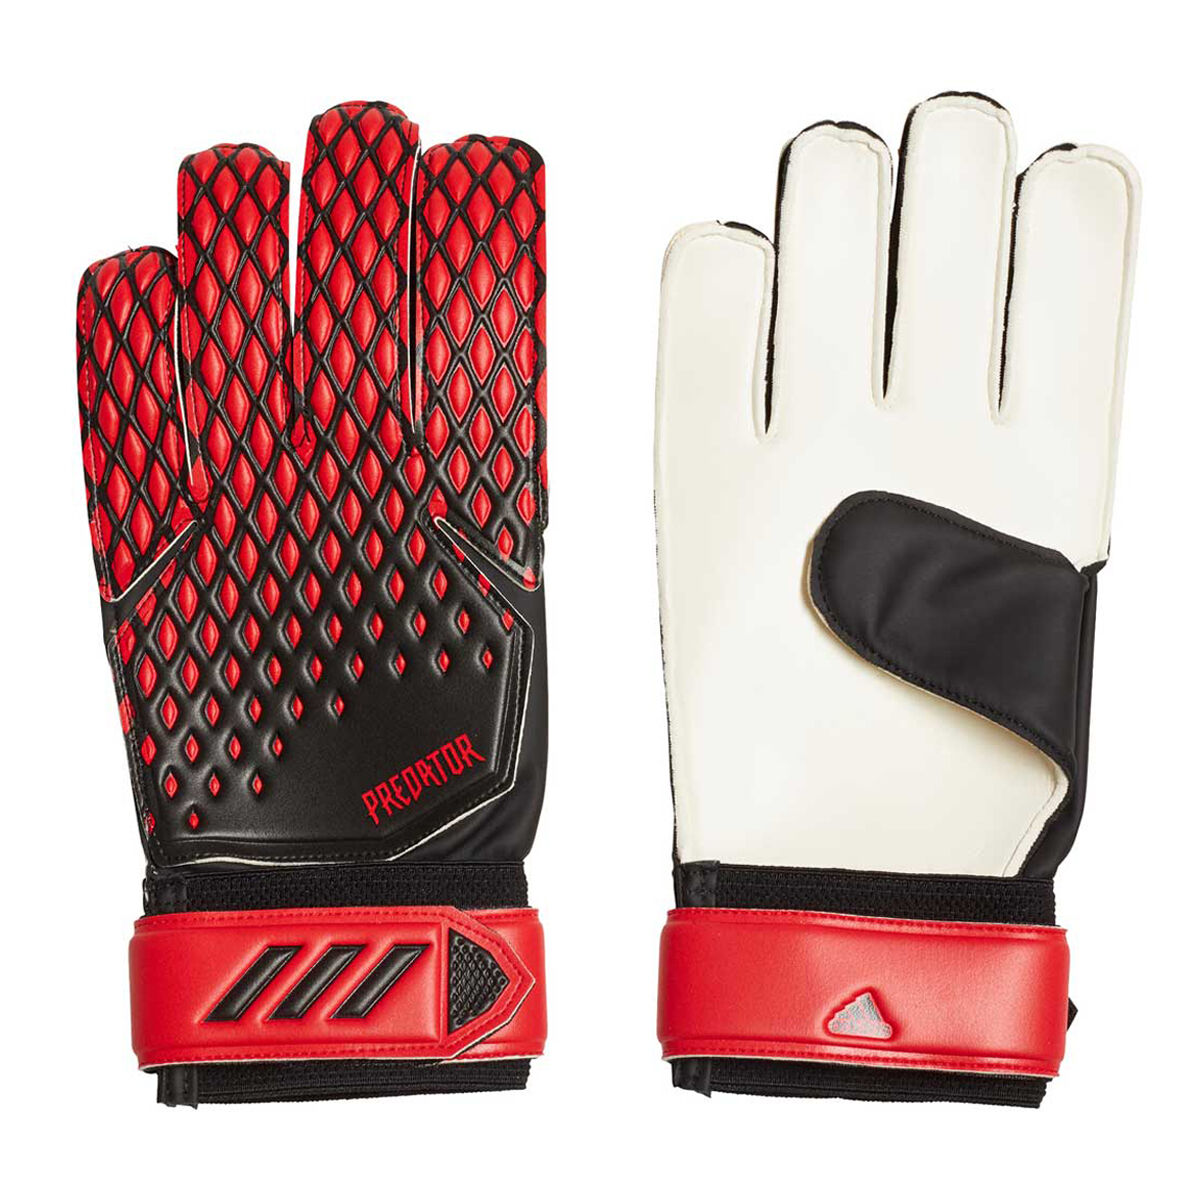 Adidas Predator Competition Unboxing Goalkeeper Glove.